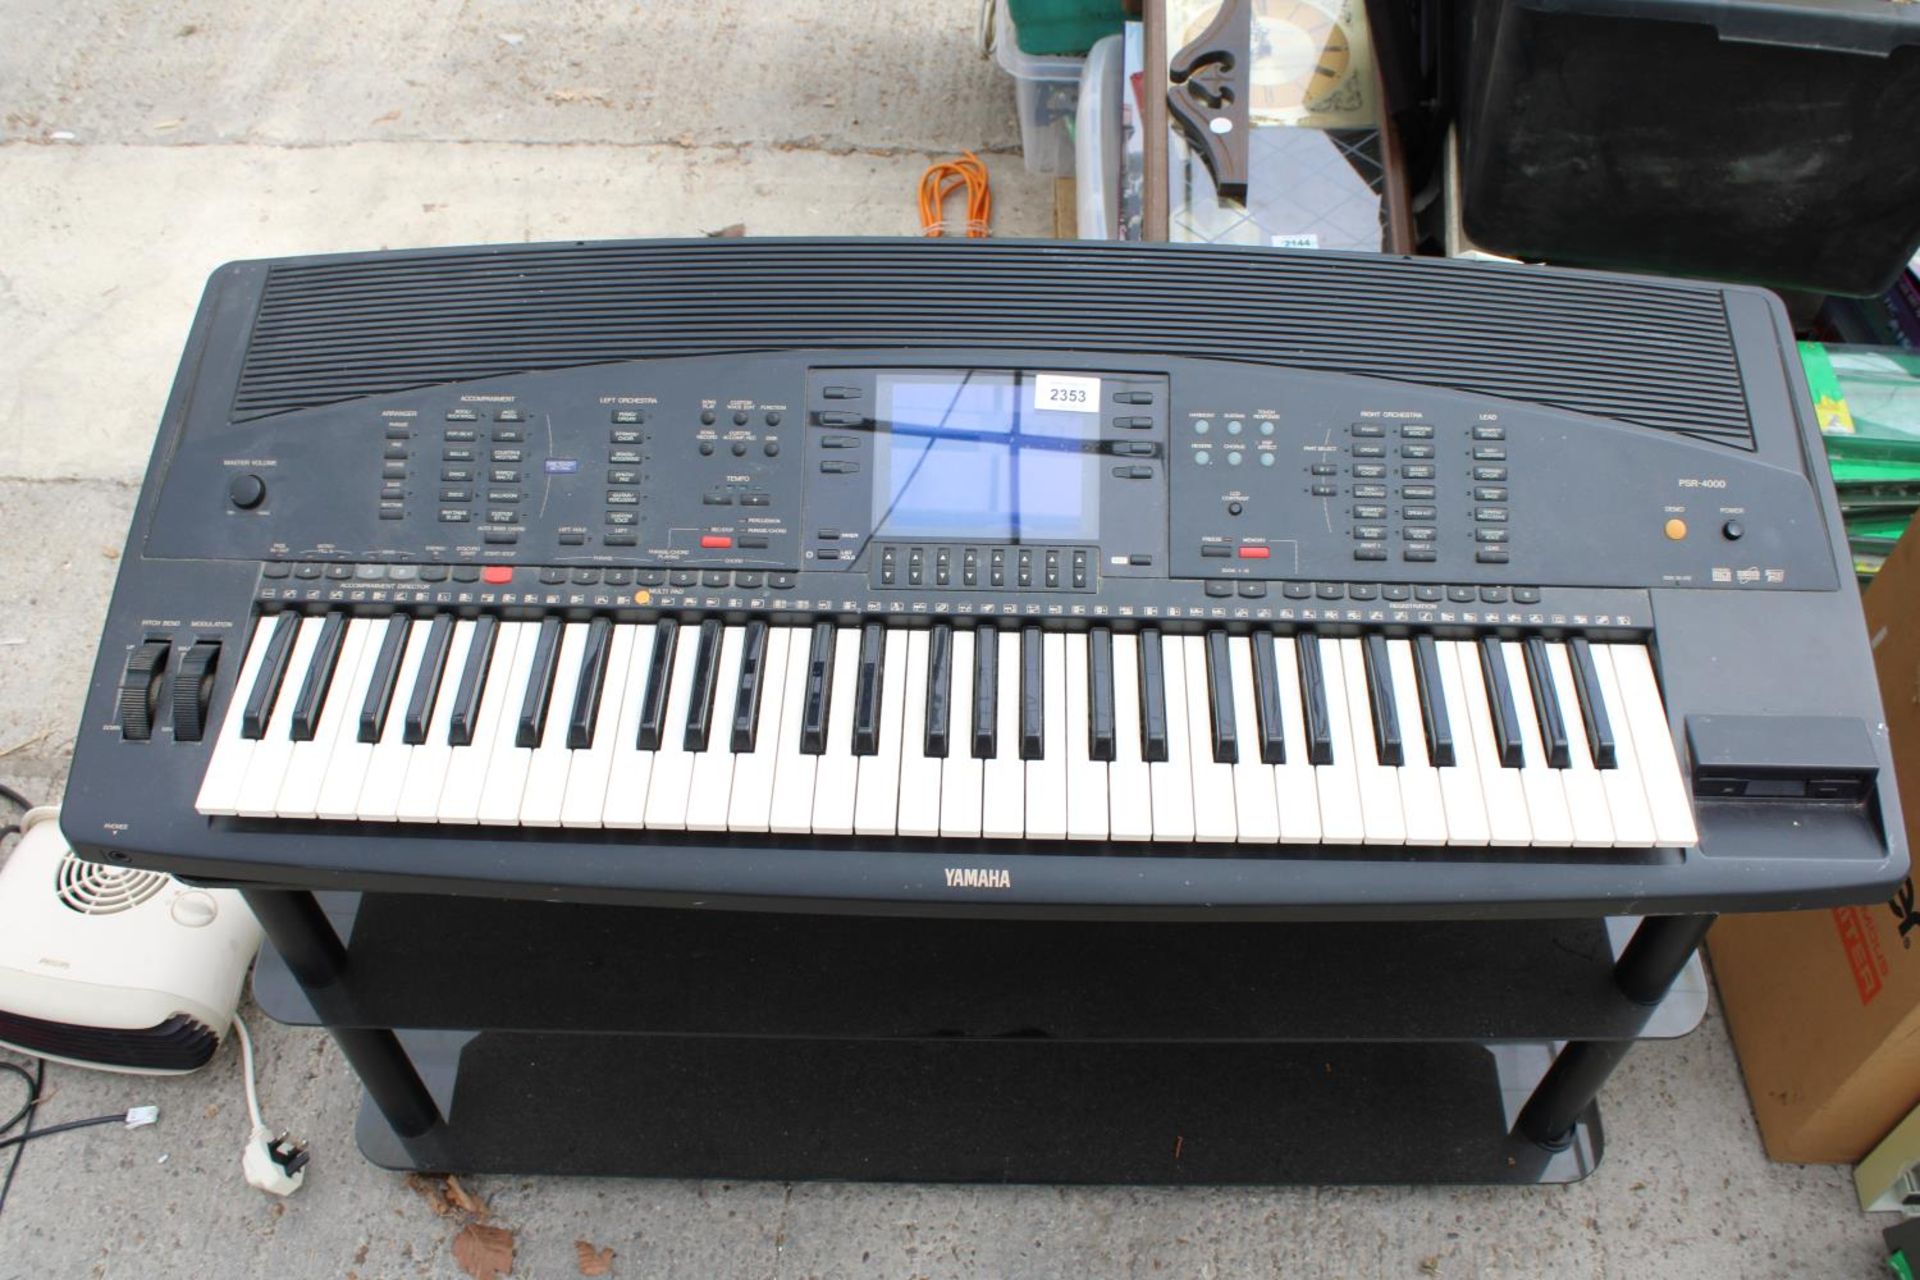 A YAMAHA PRS-4000 KEYBOARD WITH MANUAL AND FLOPPY DISCS - Image 3 of 3